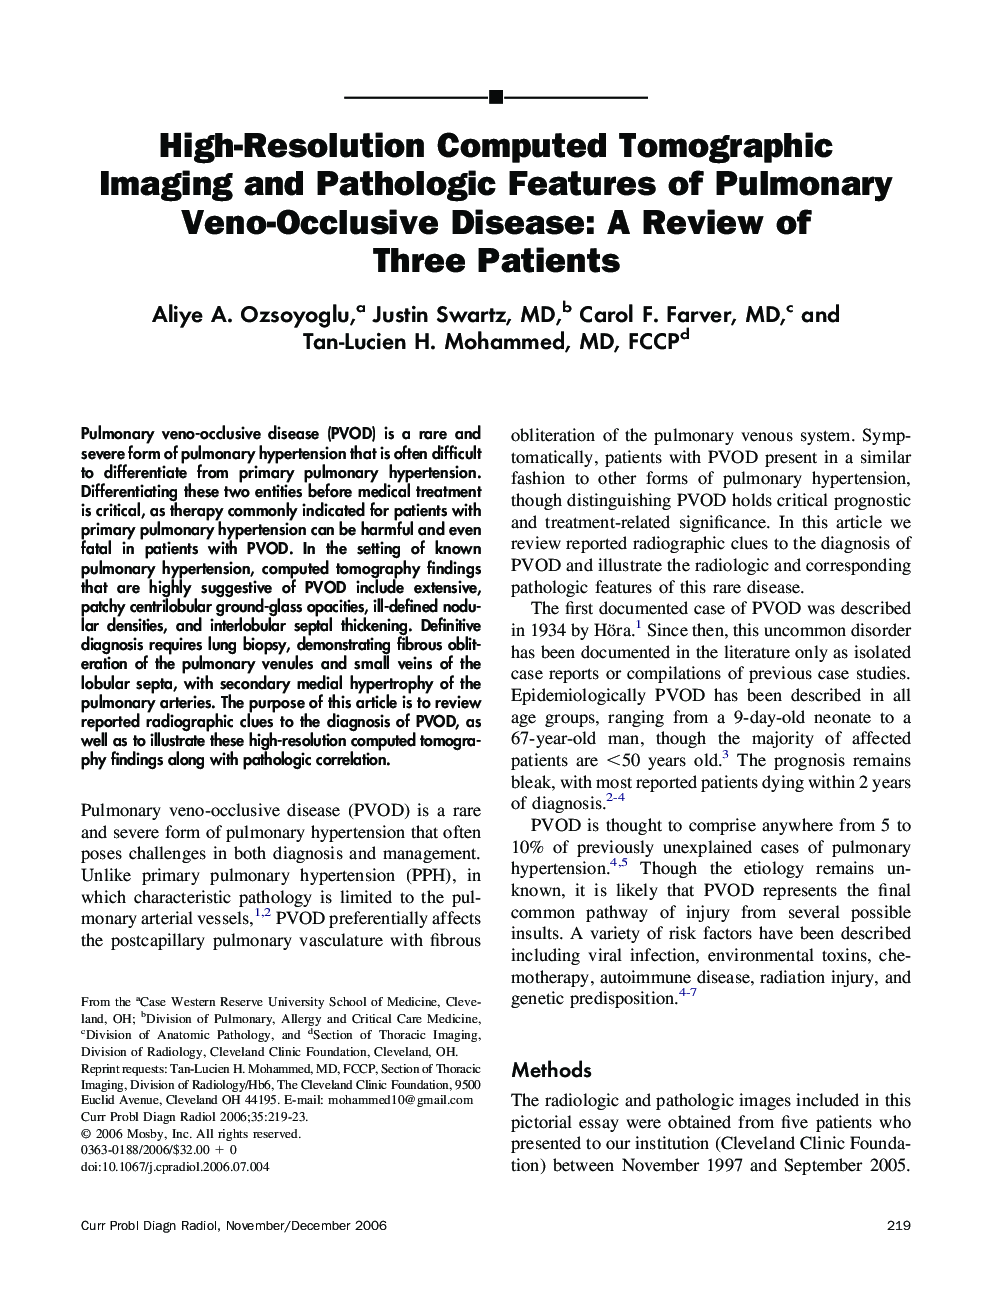 High-Resolution Computed Tomographic Imaging and Pathologic Features of Pulmonary Veno-Occlusive Disease: A Review of Three Patients